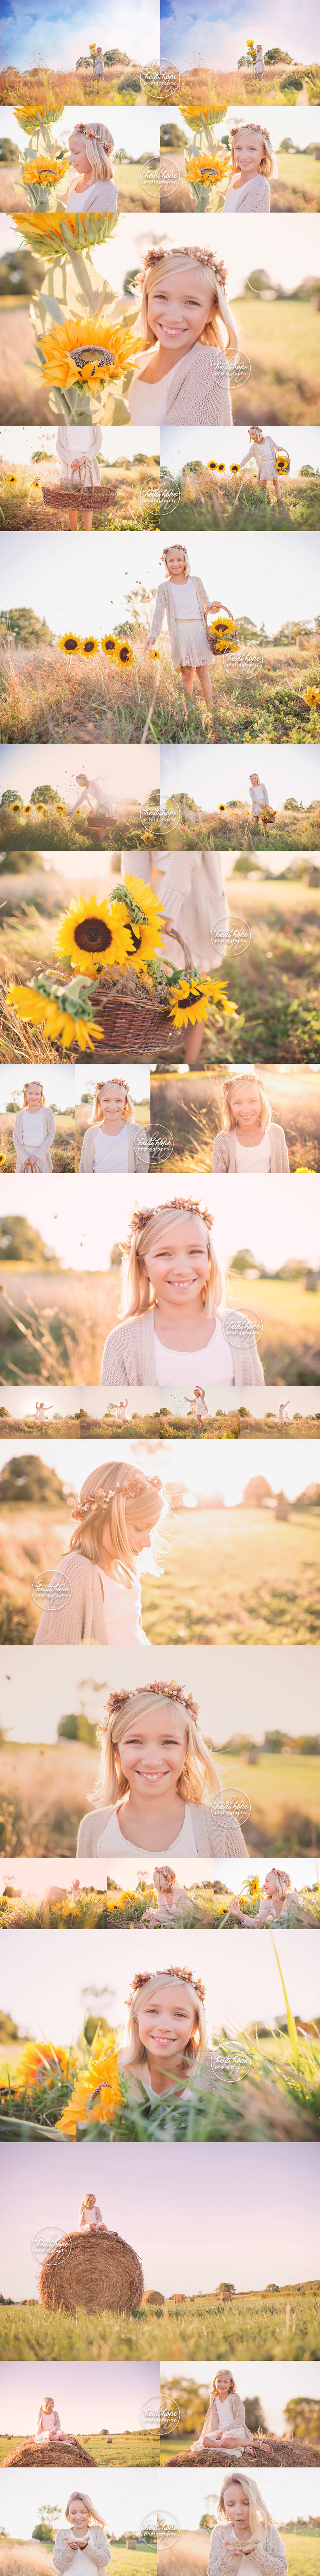 autumn-sunflower-photo-session-in-a-field-by-tiverton-rhode-island-photographer